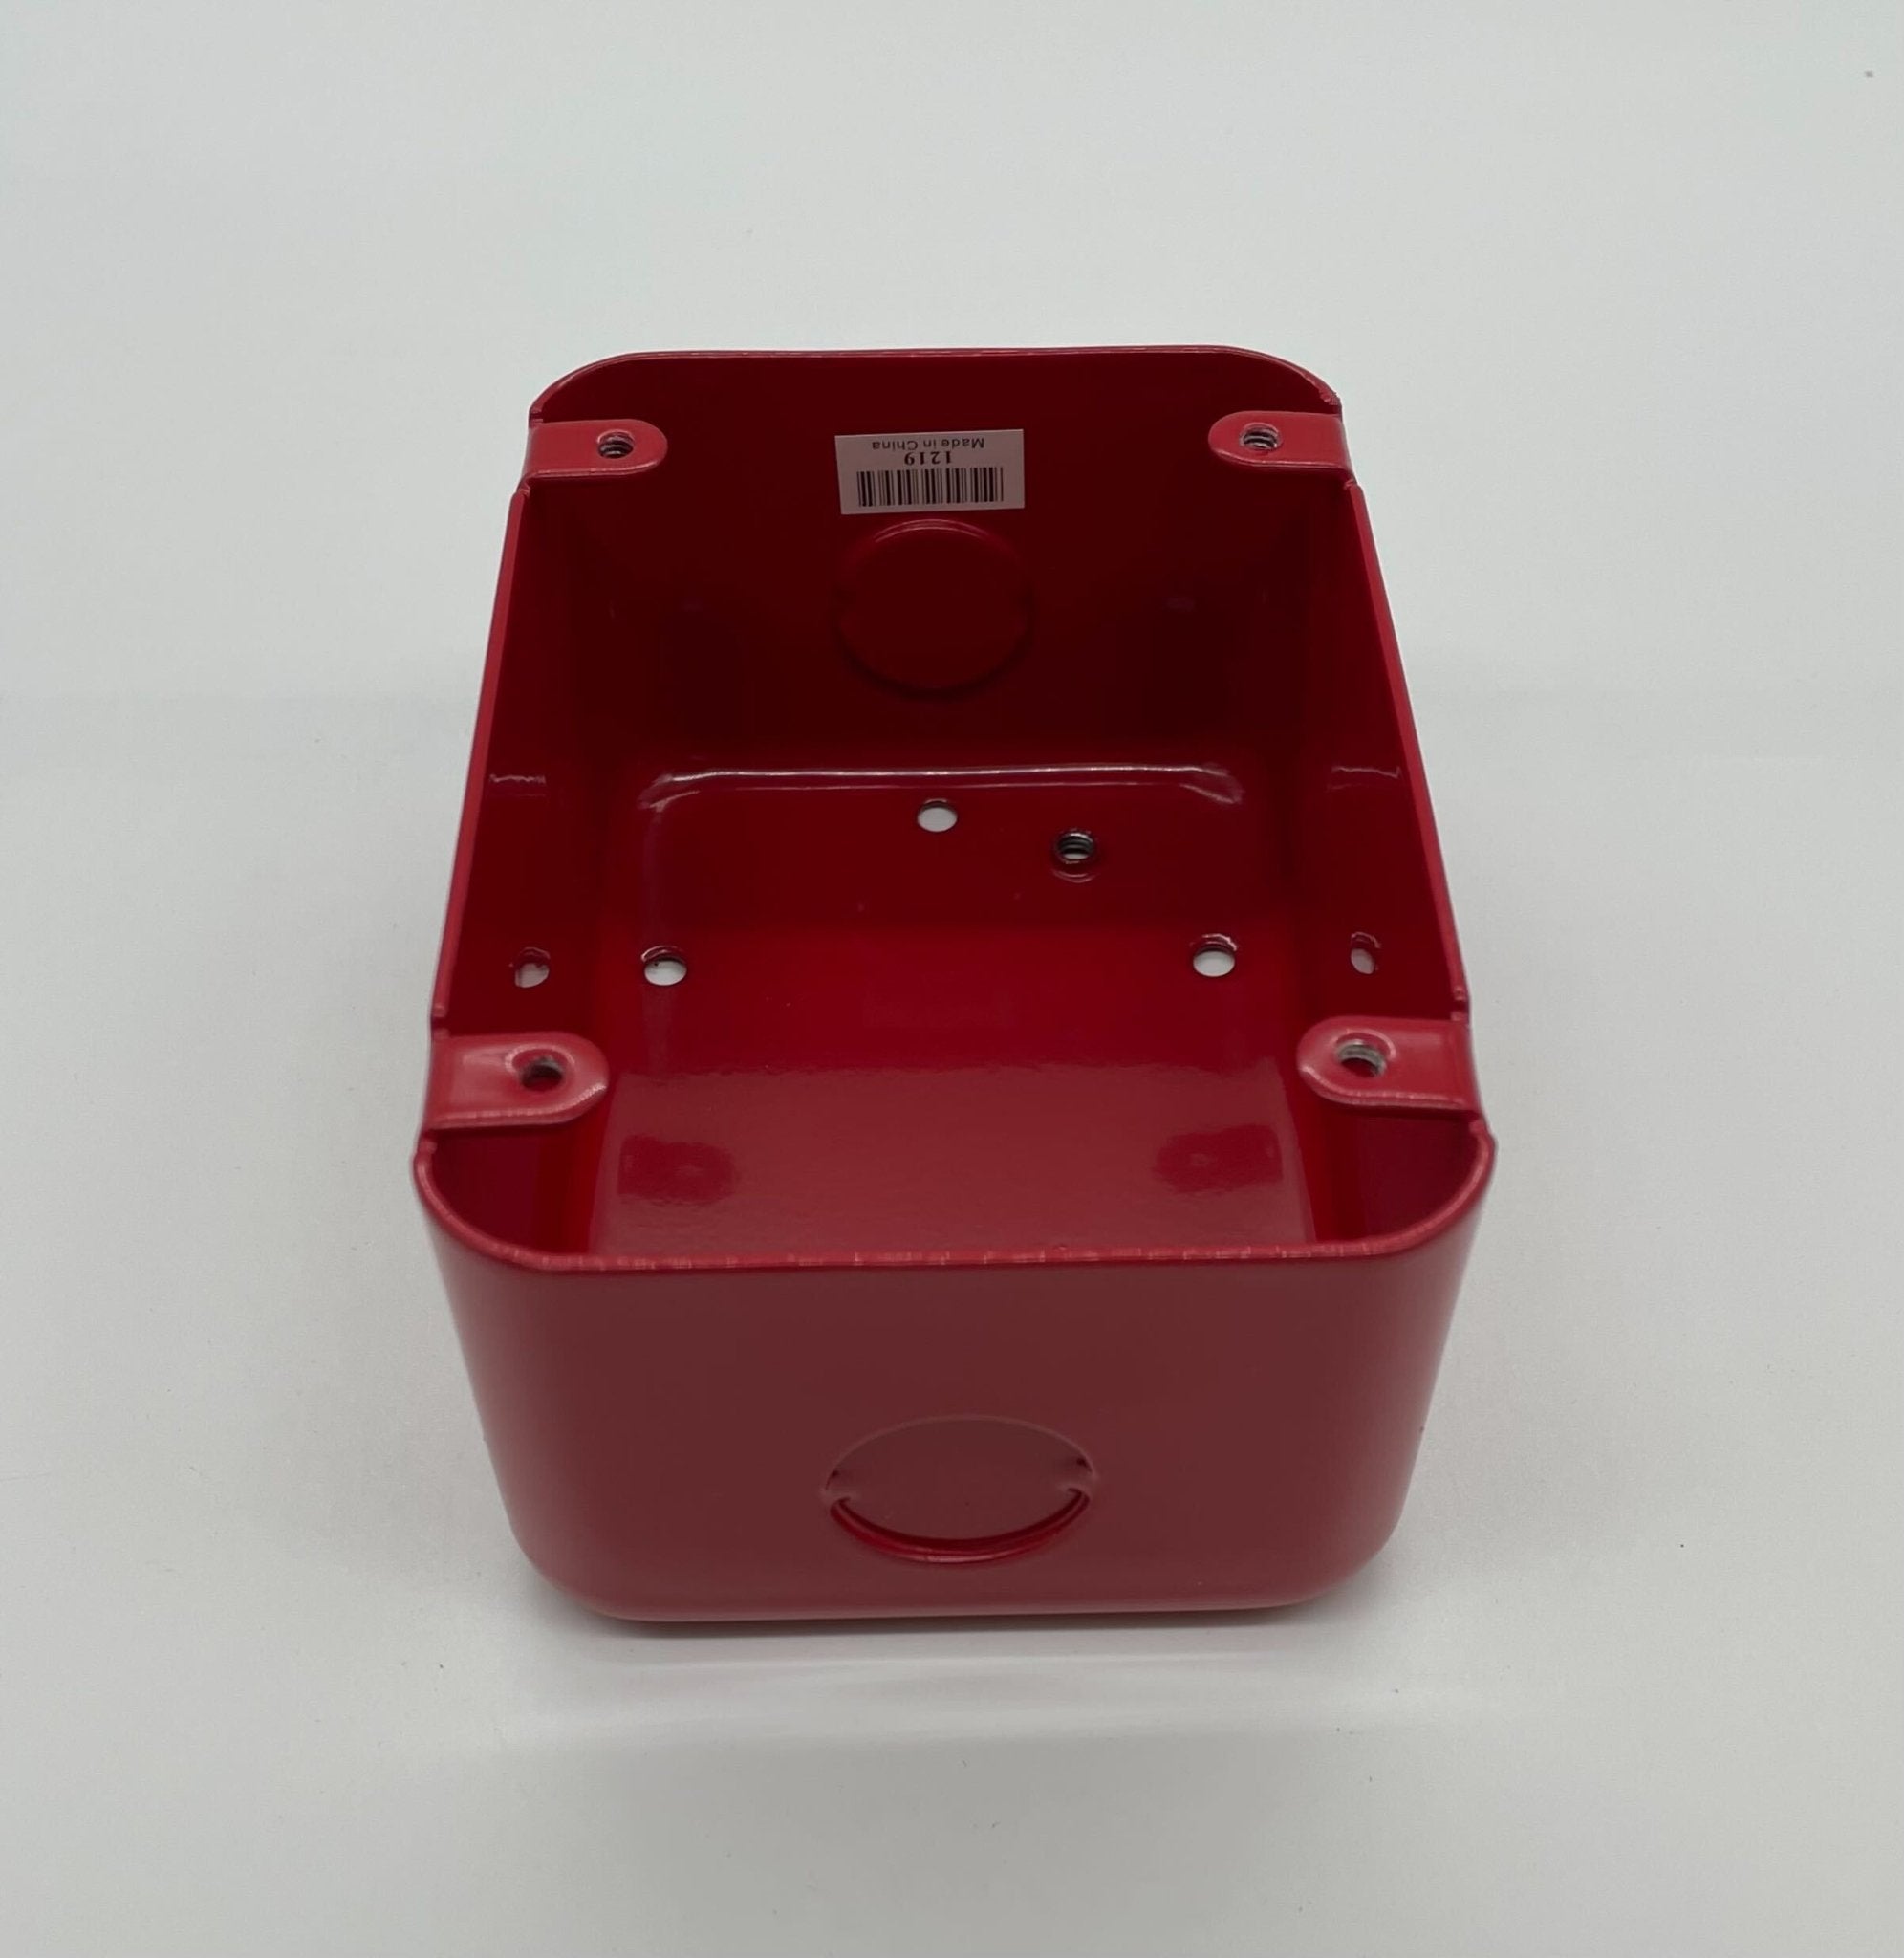 Wheelock MPS-ISB - The Fire Alarm Supplier